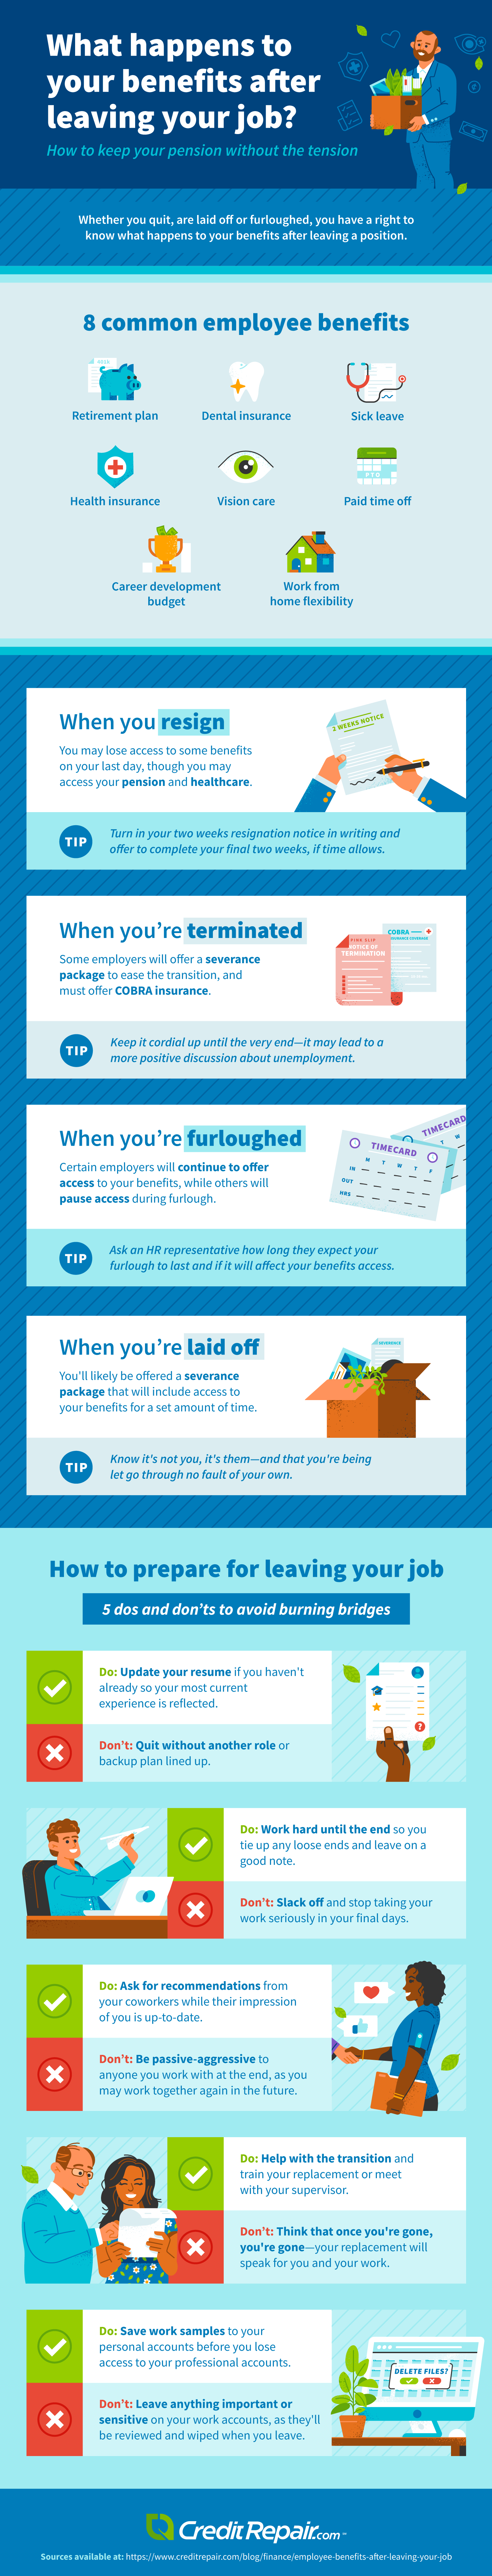 Infographic: Job Benefits After Leaving a Job: What You Need to Know